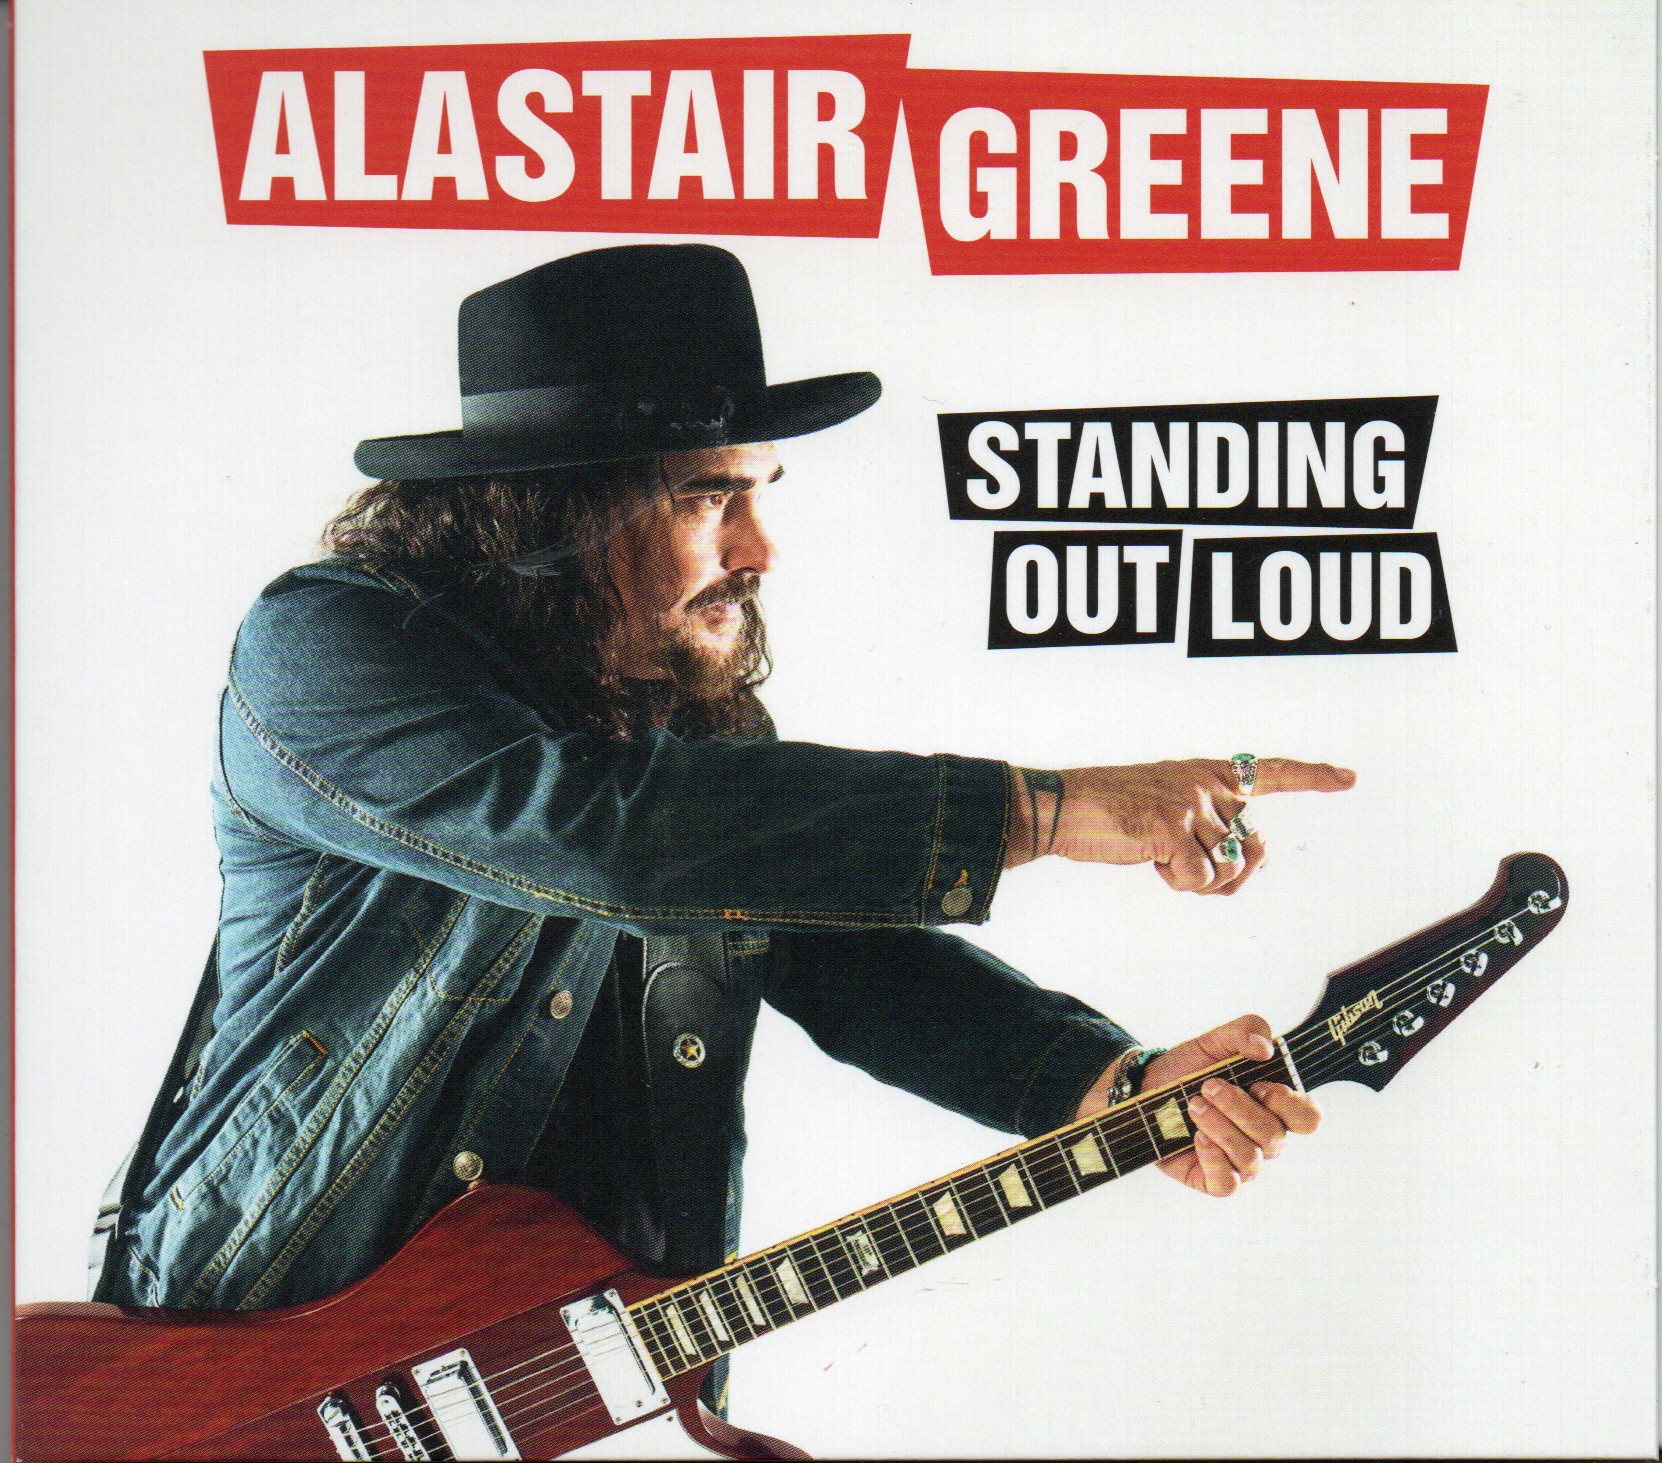 Alastair Greene "Standing Out Loud"